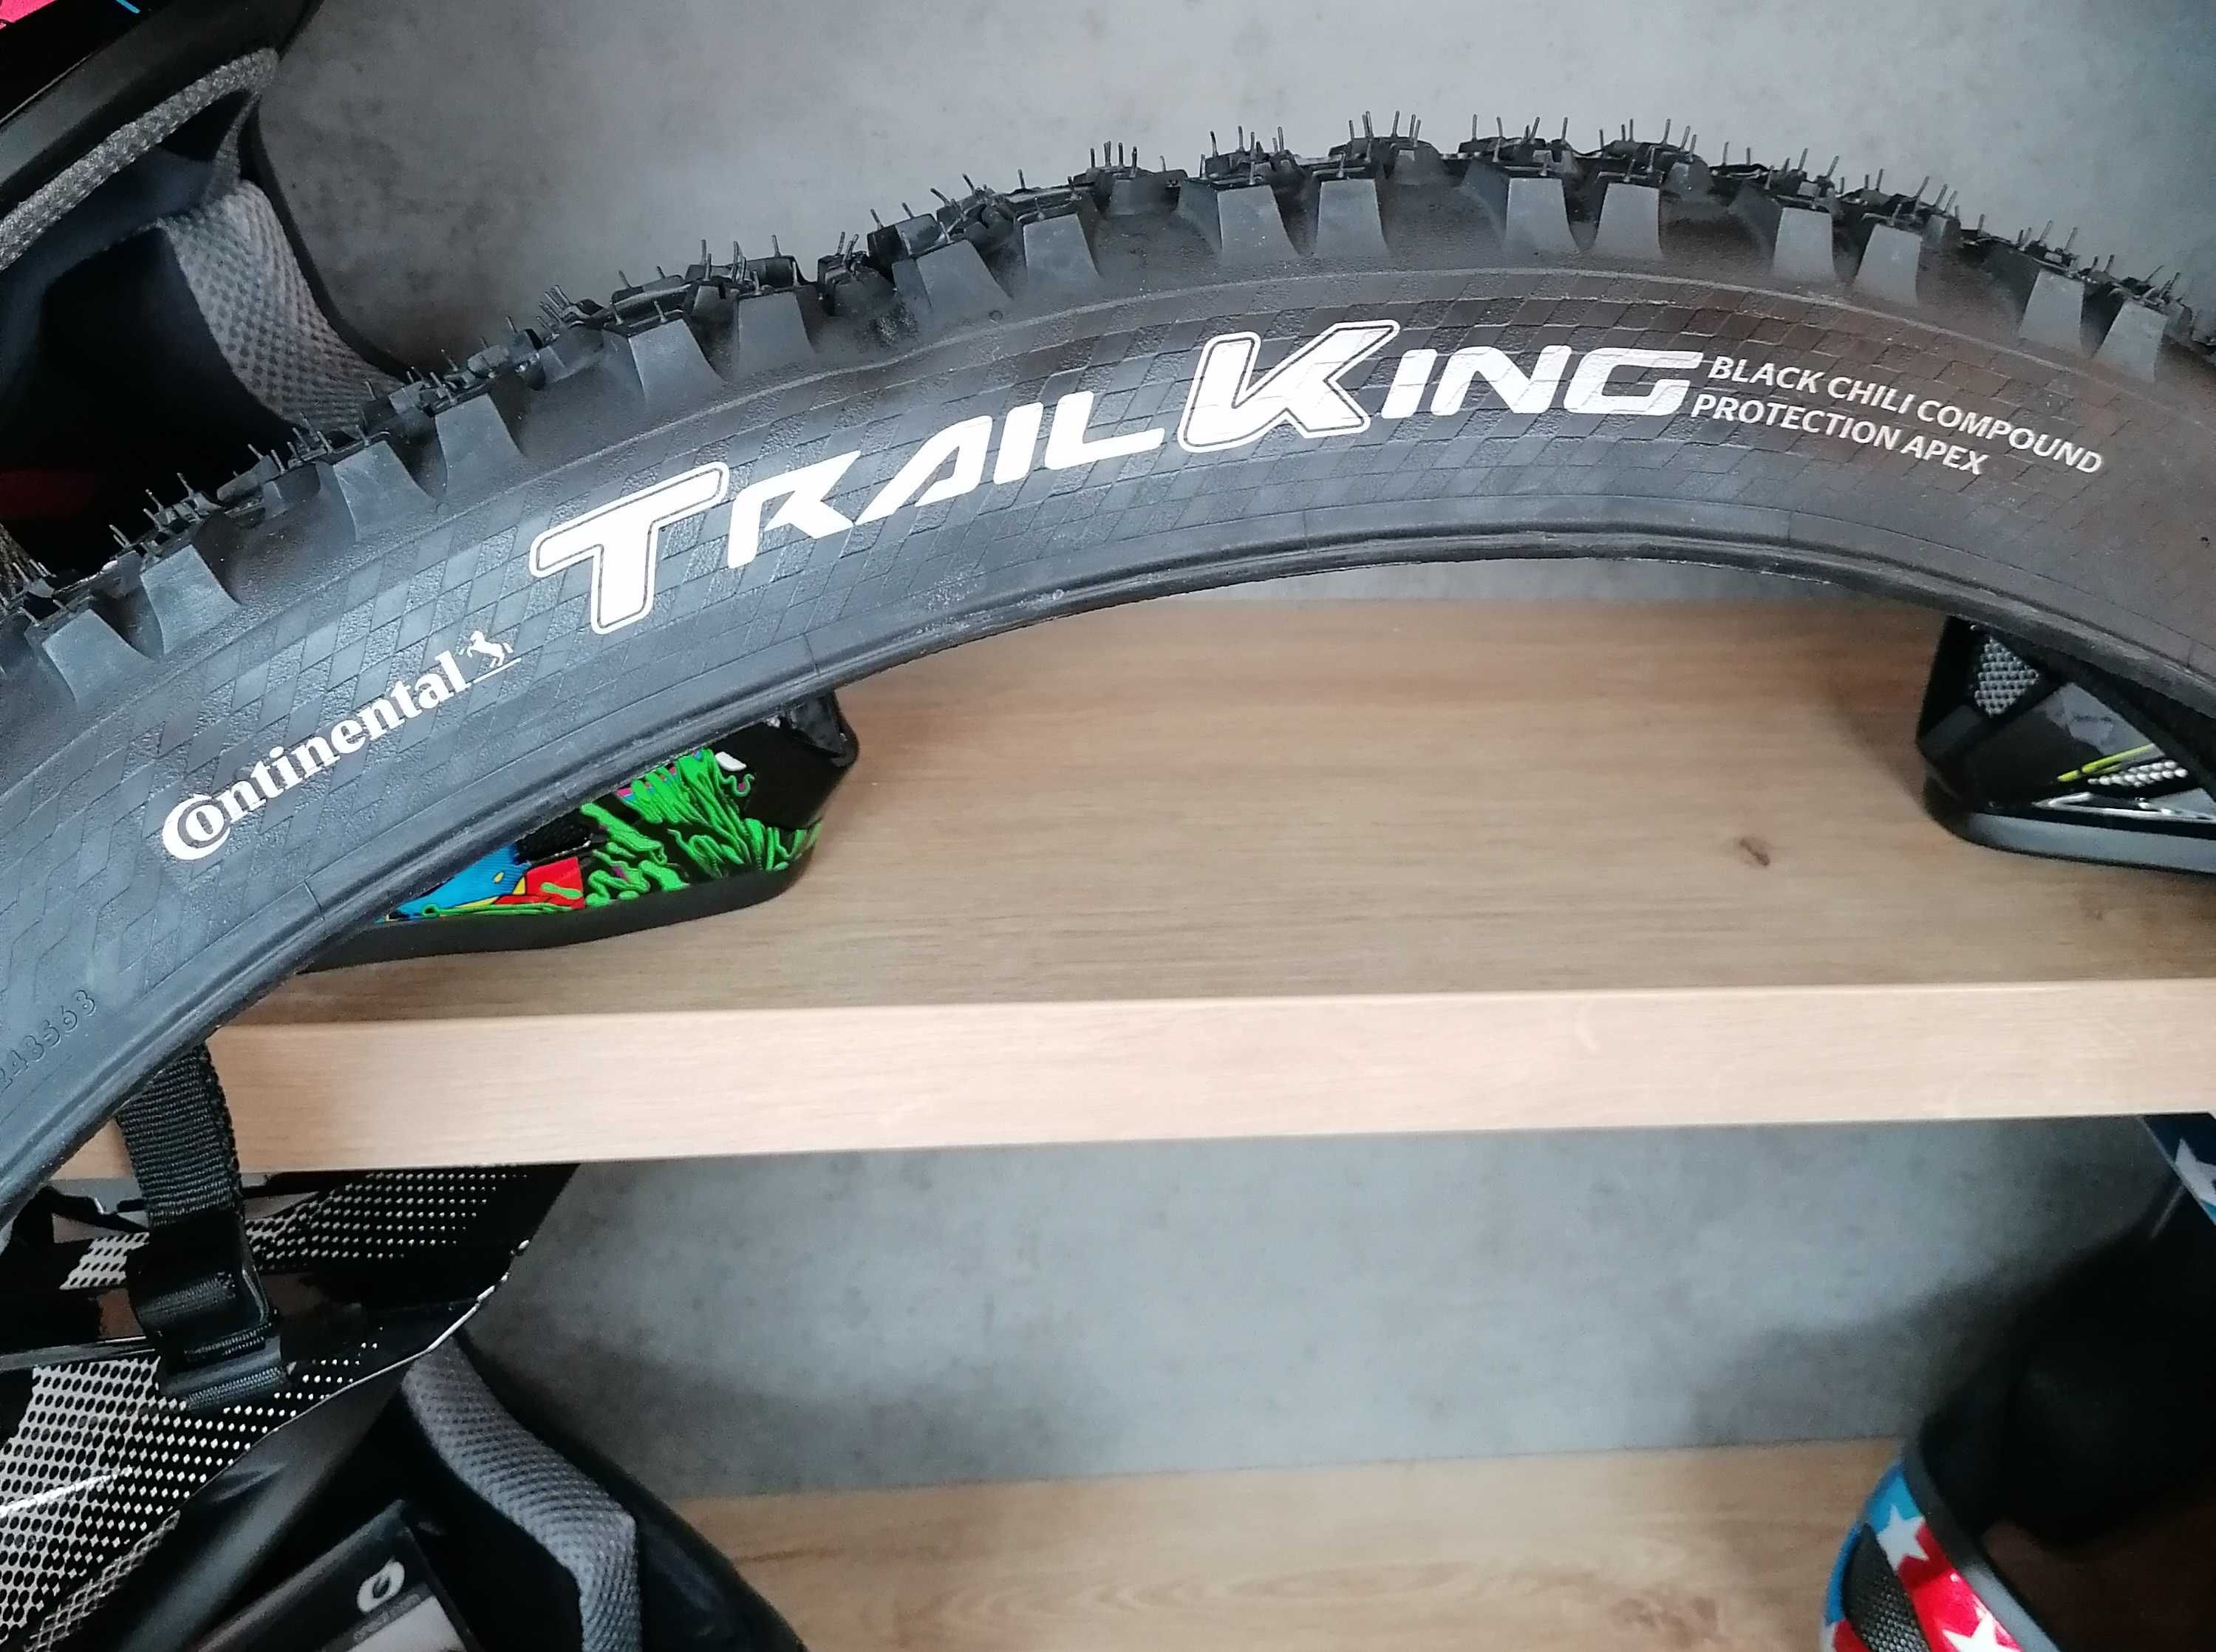 Anvelopa CONTINENTAL Trail King  27.5x2.60 Black Chili ProTection APEX